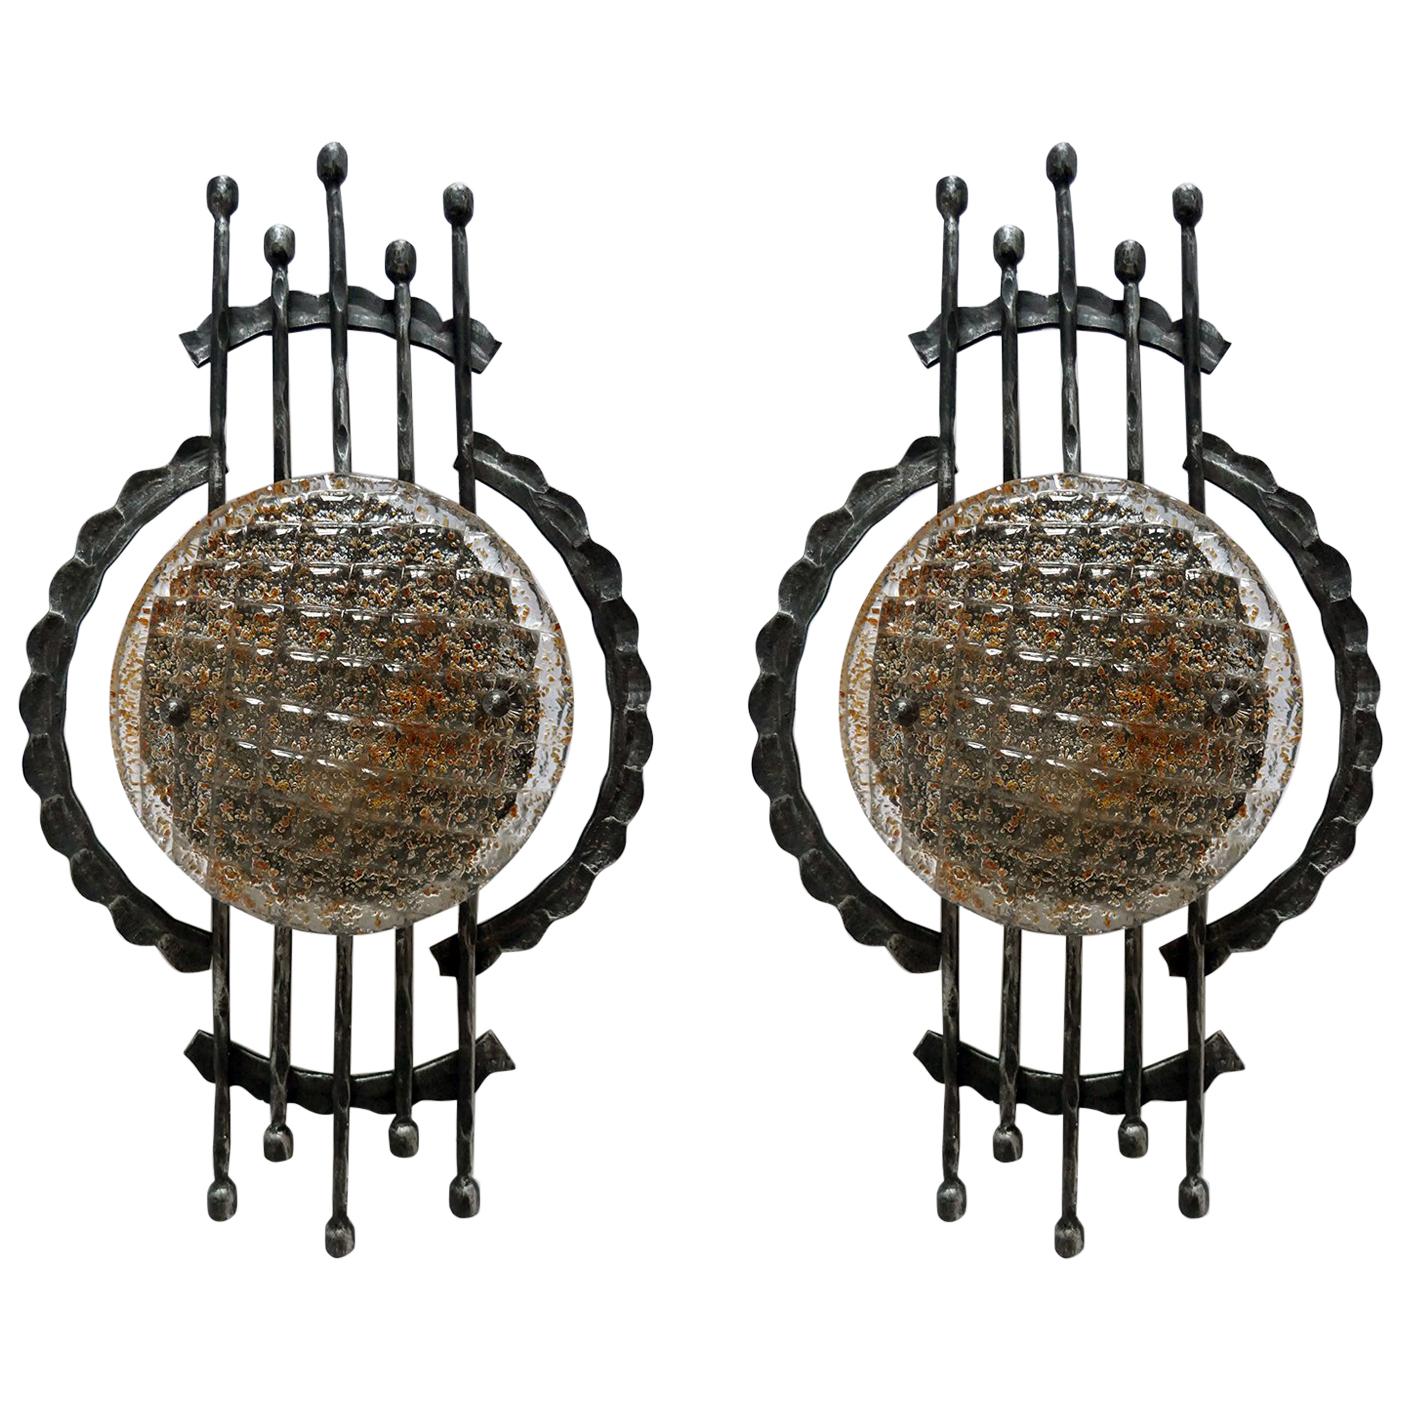 Vintage Pair of Large Sculptural Iron and Glass Wall Flush Mounts Sconces, 1960s